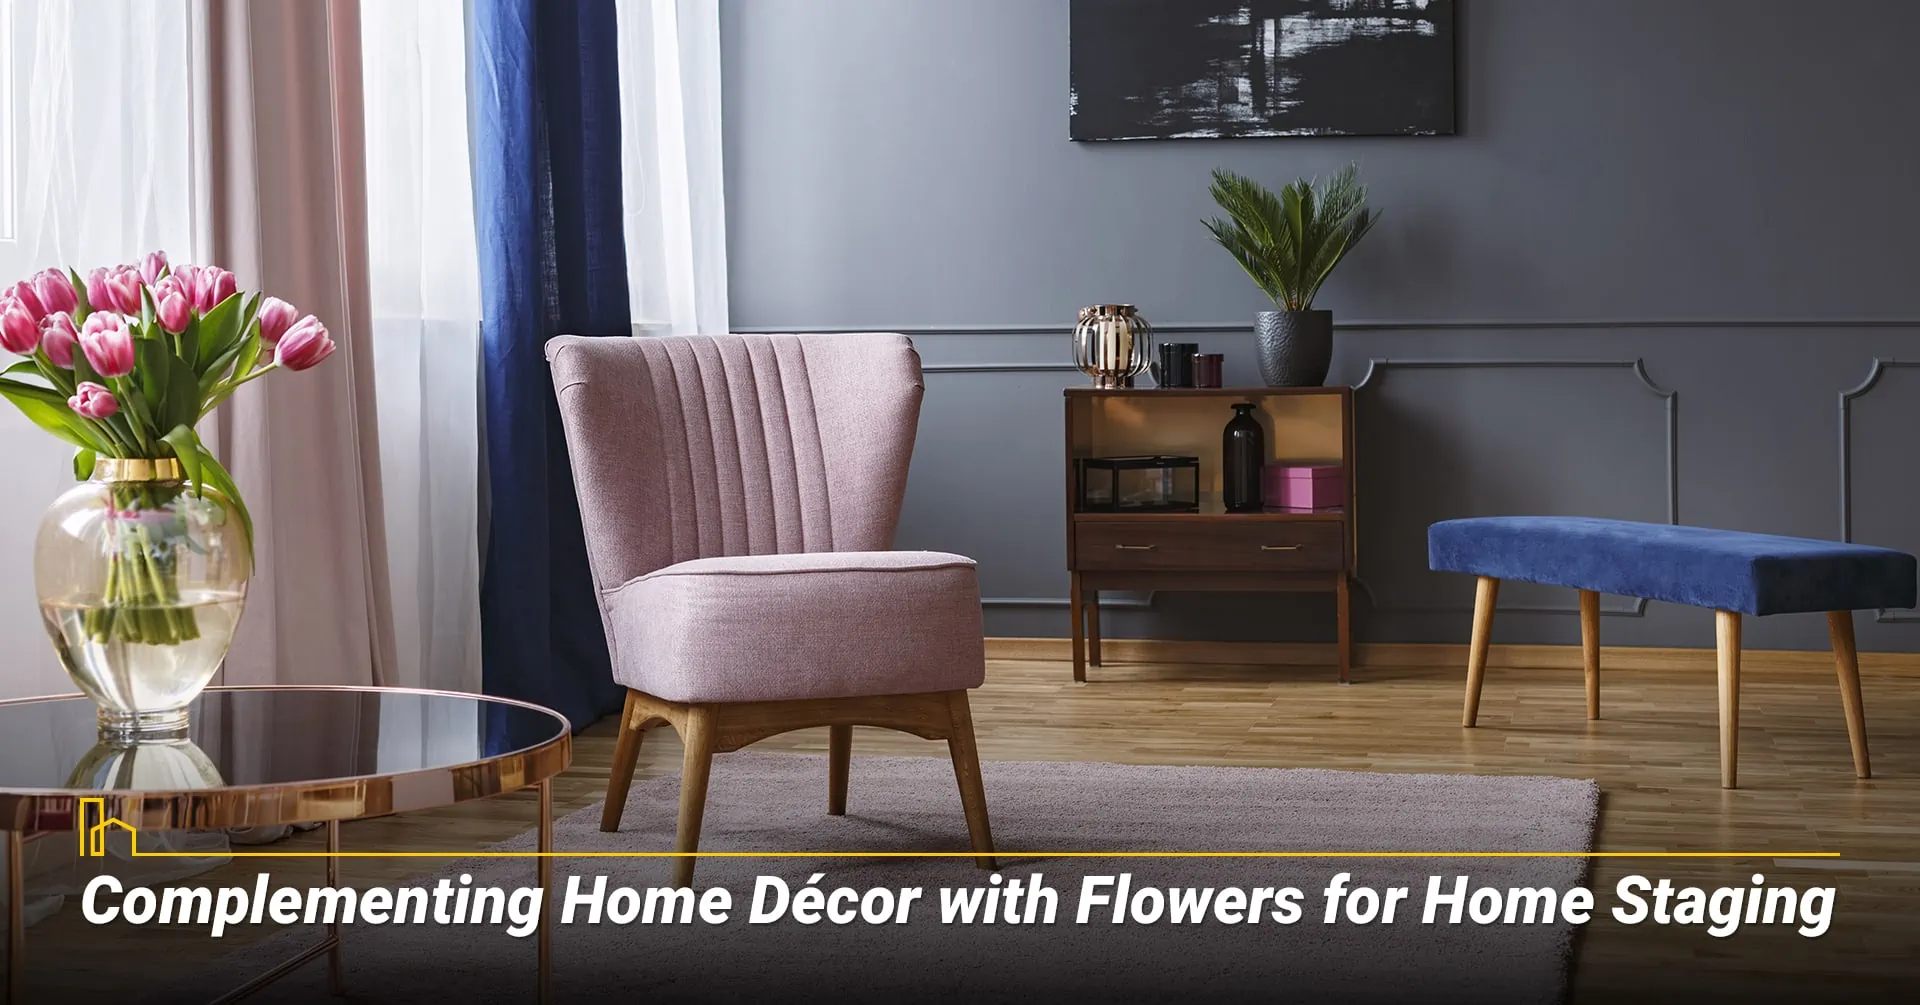 5. Complementing Home Décor with Flowers for Home Staging